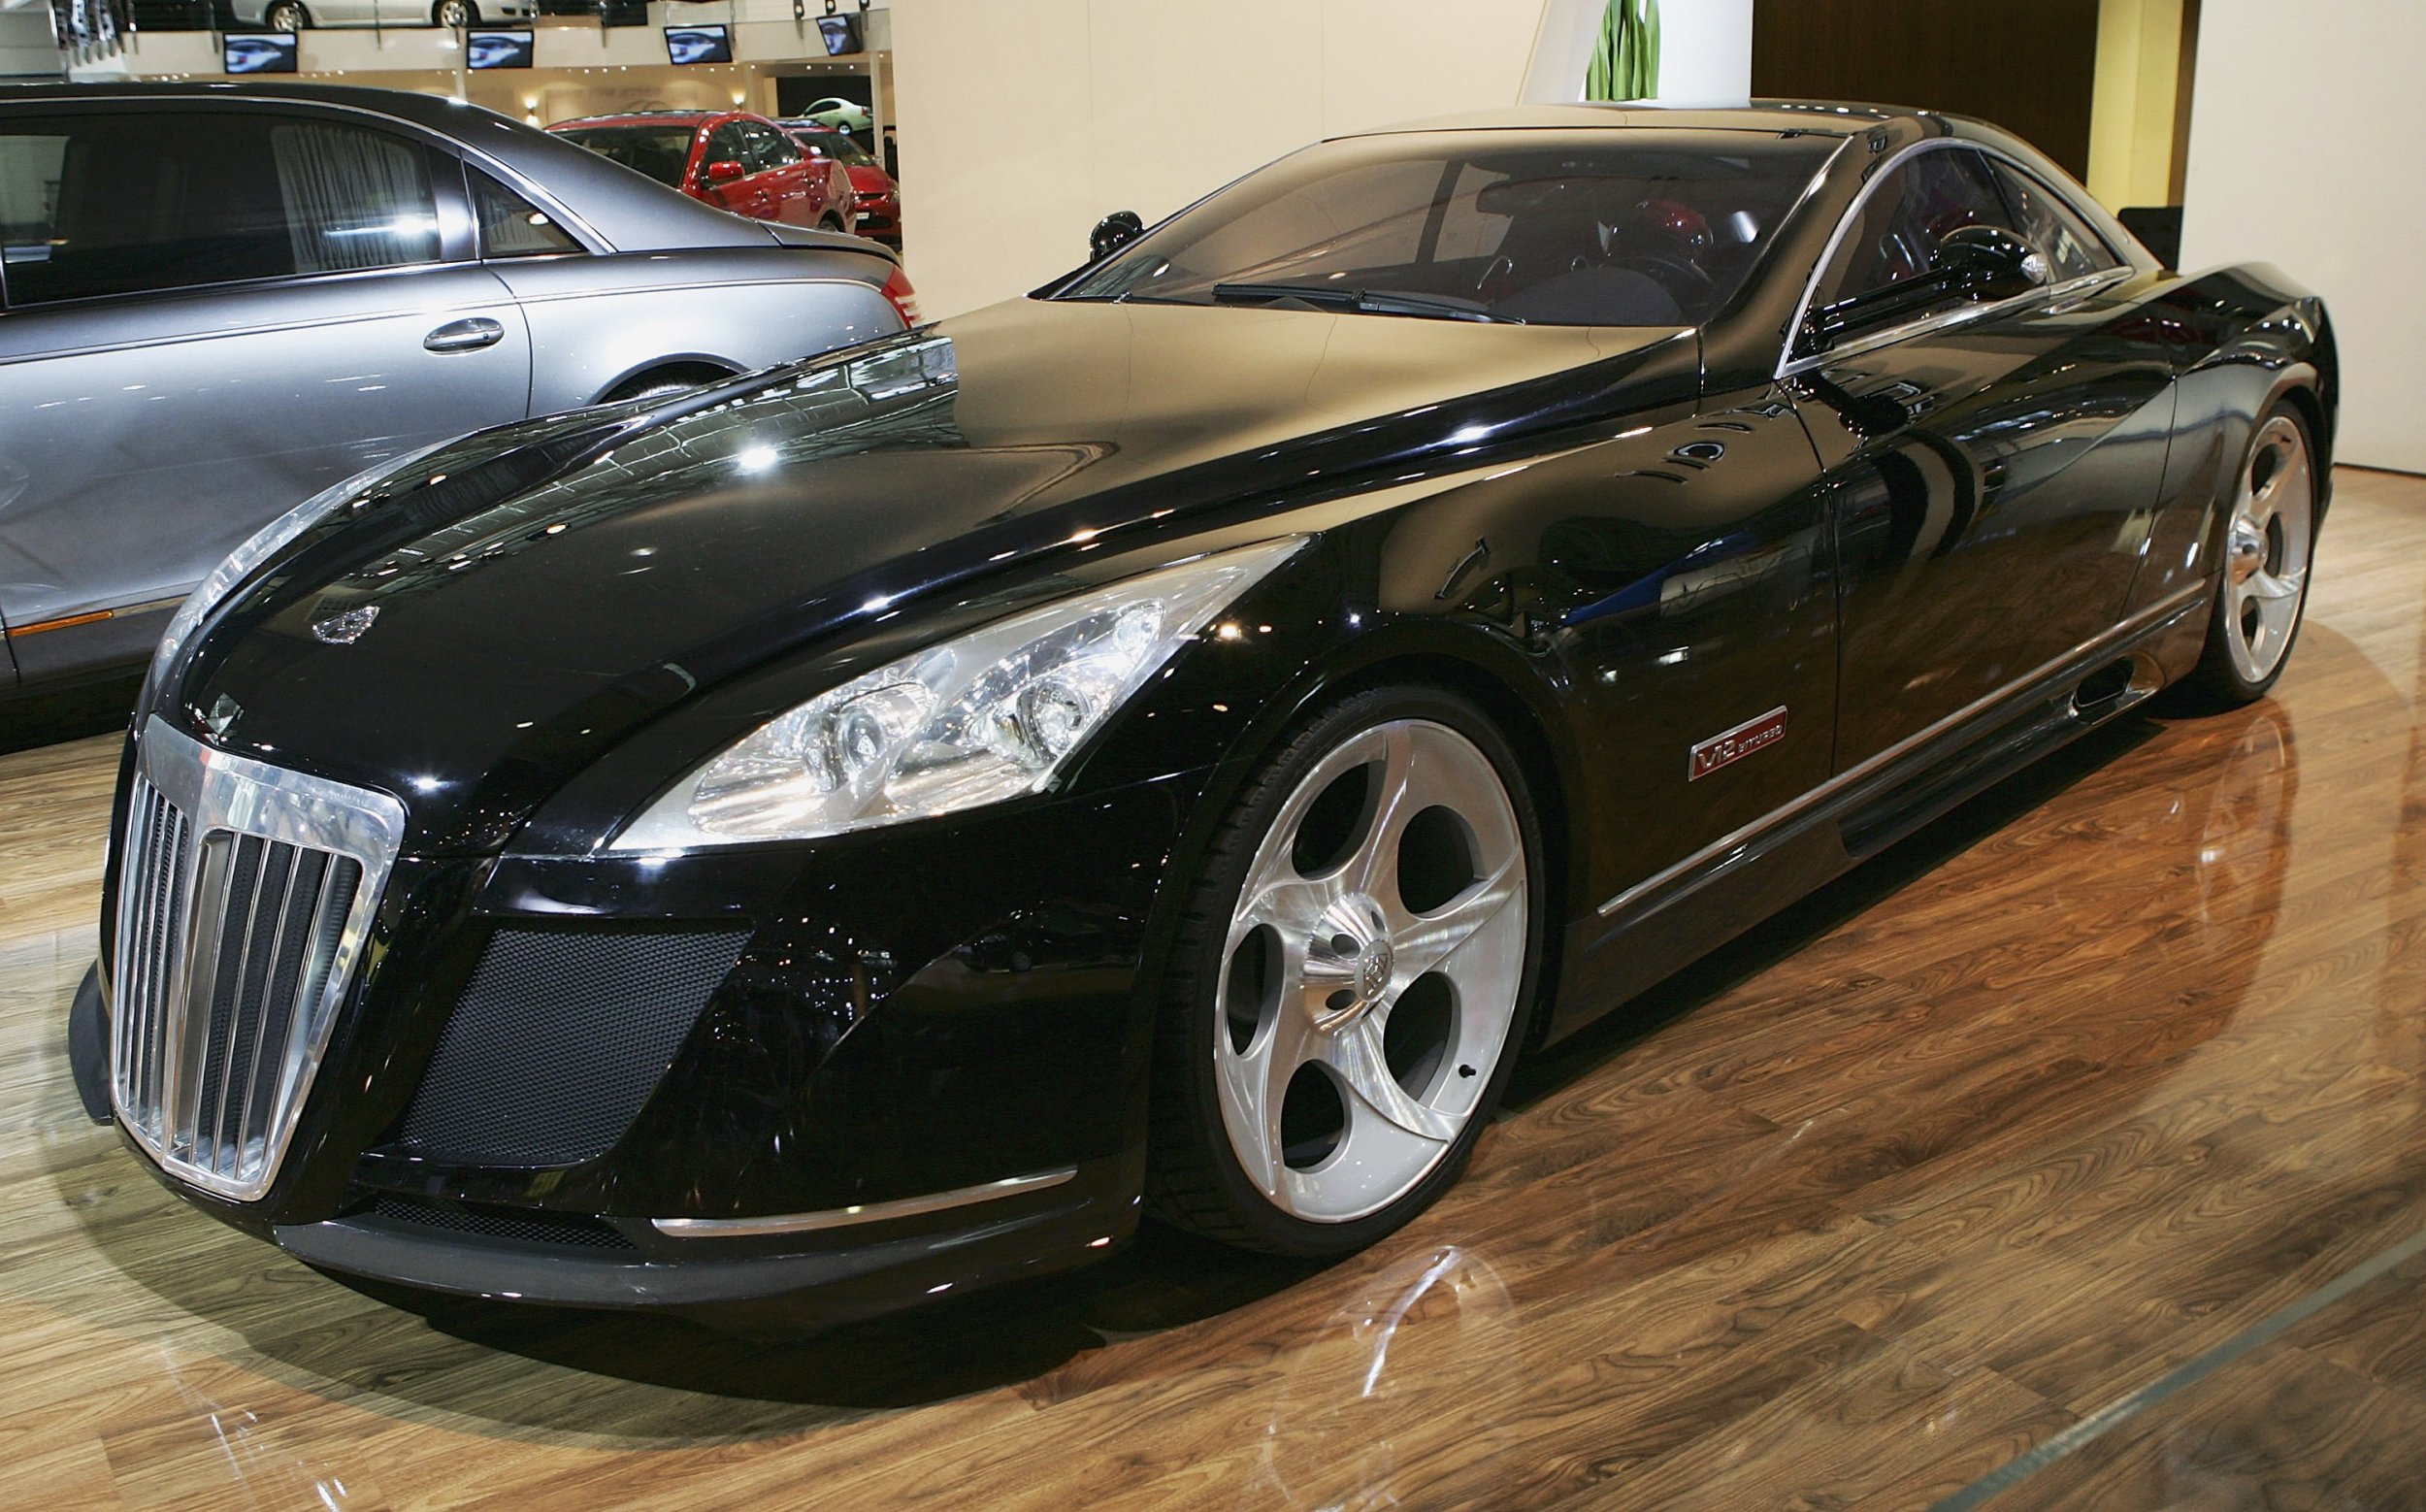 The Maybach Exelero is one of the most expensive cars in the world, as it was produced only once globally